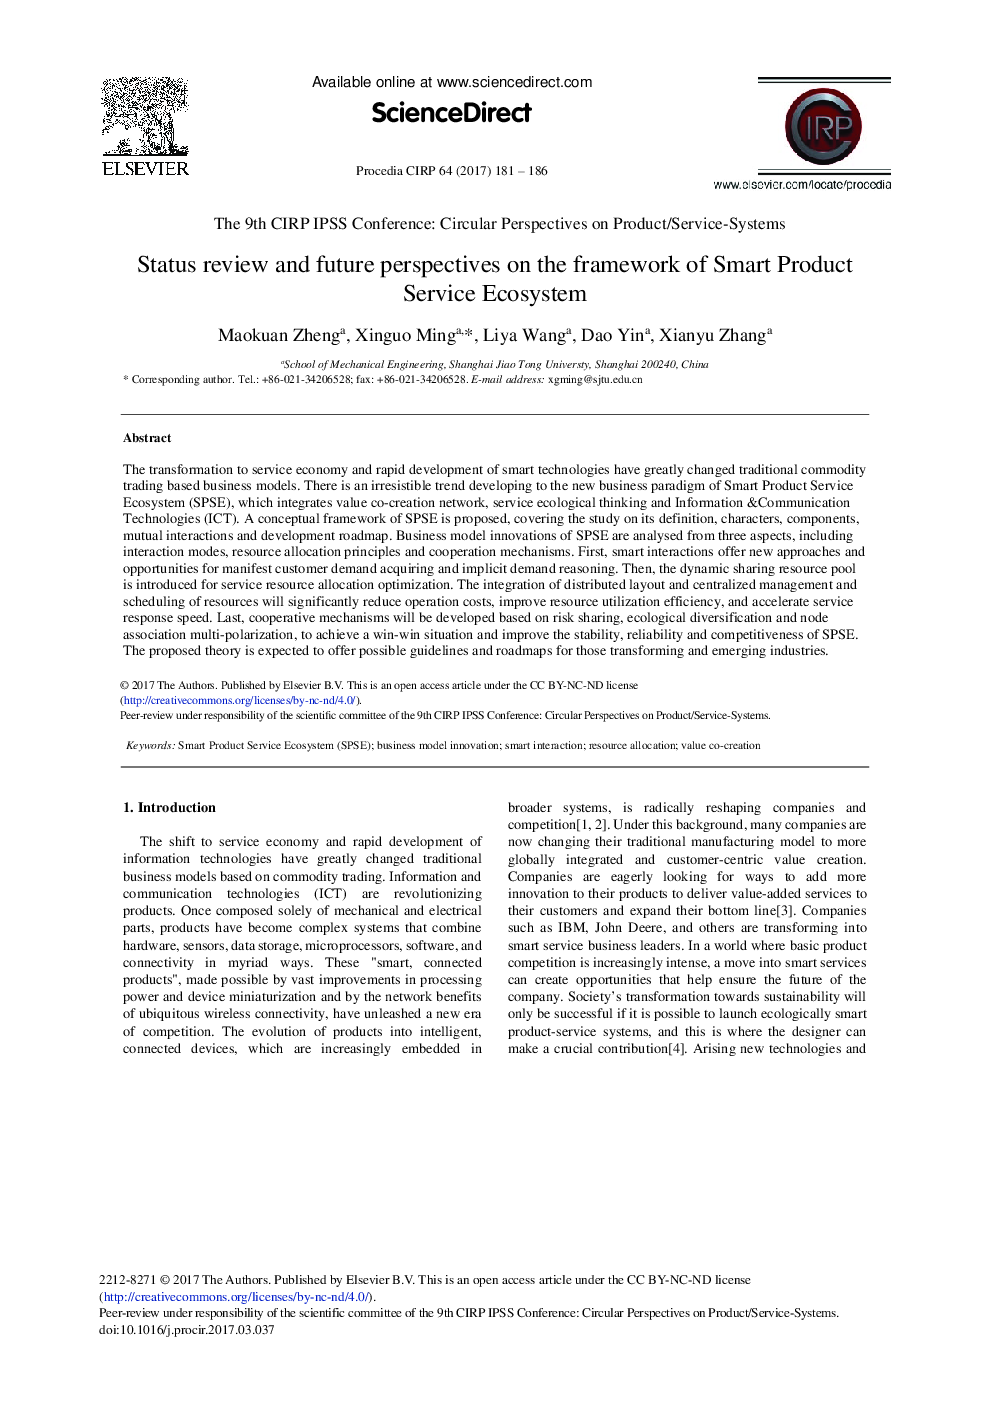 Status Review and Future Perspectives on the Framework of Smart Product Service Ecosystem